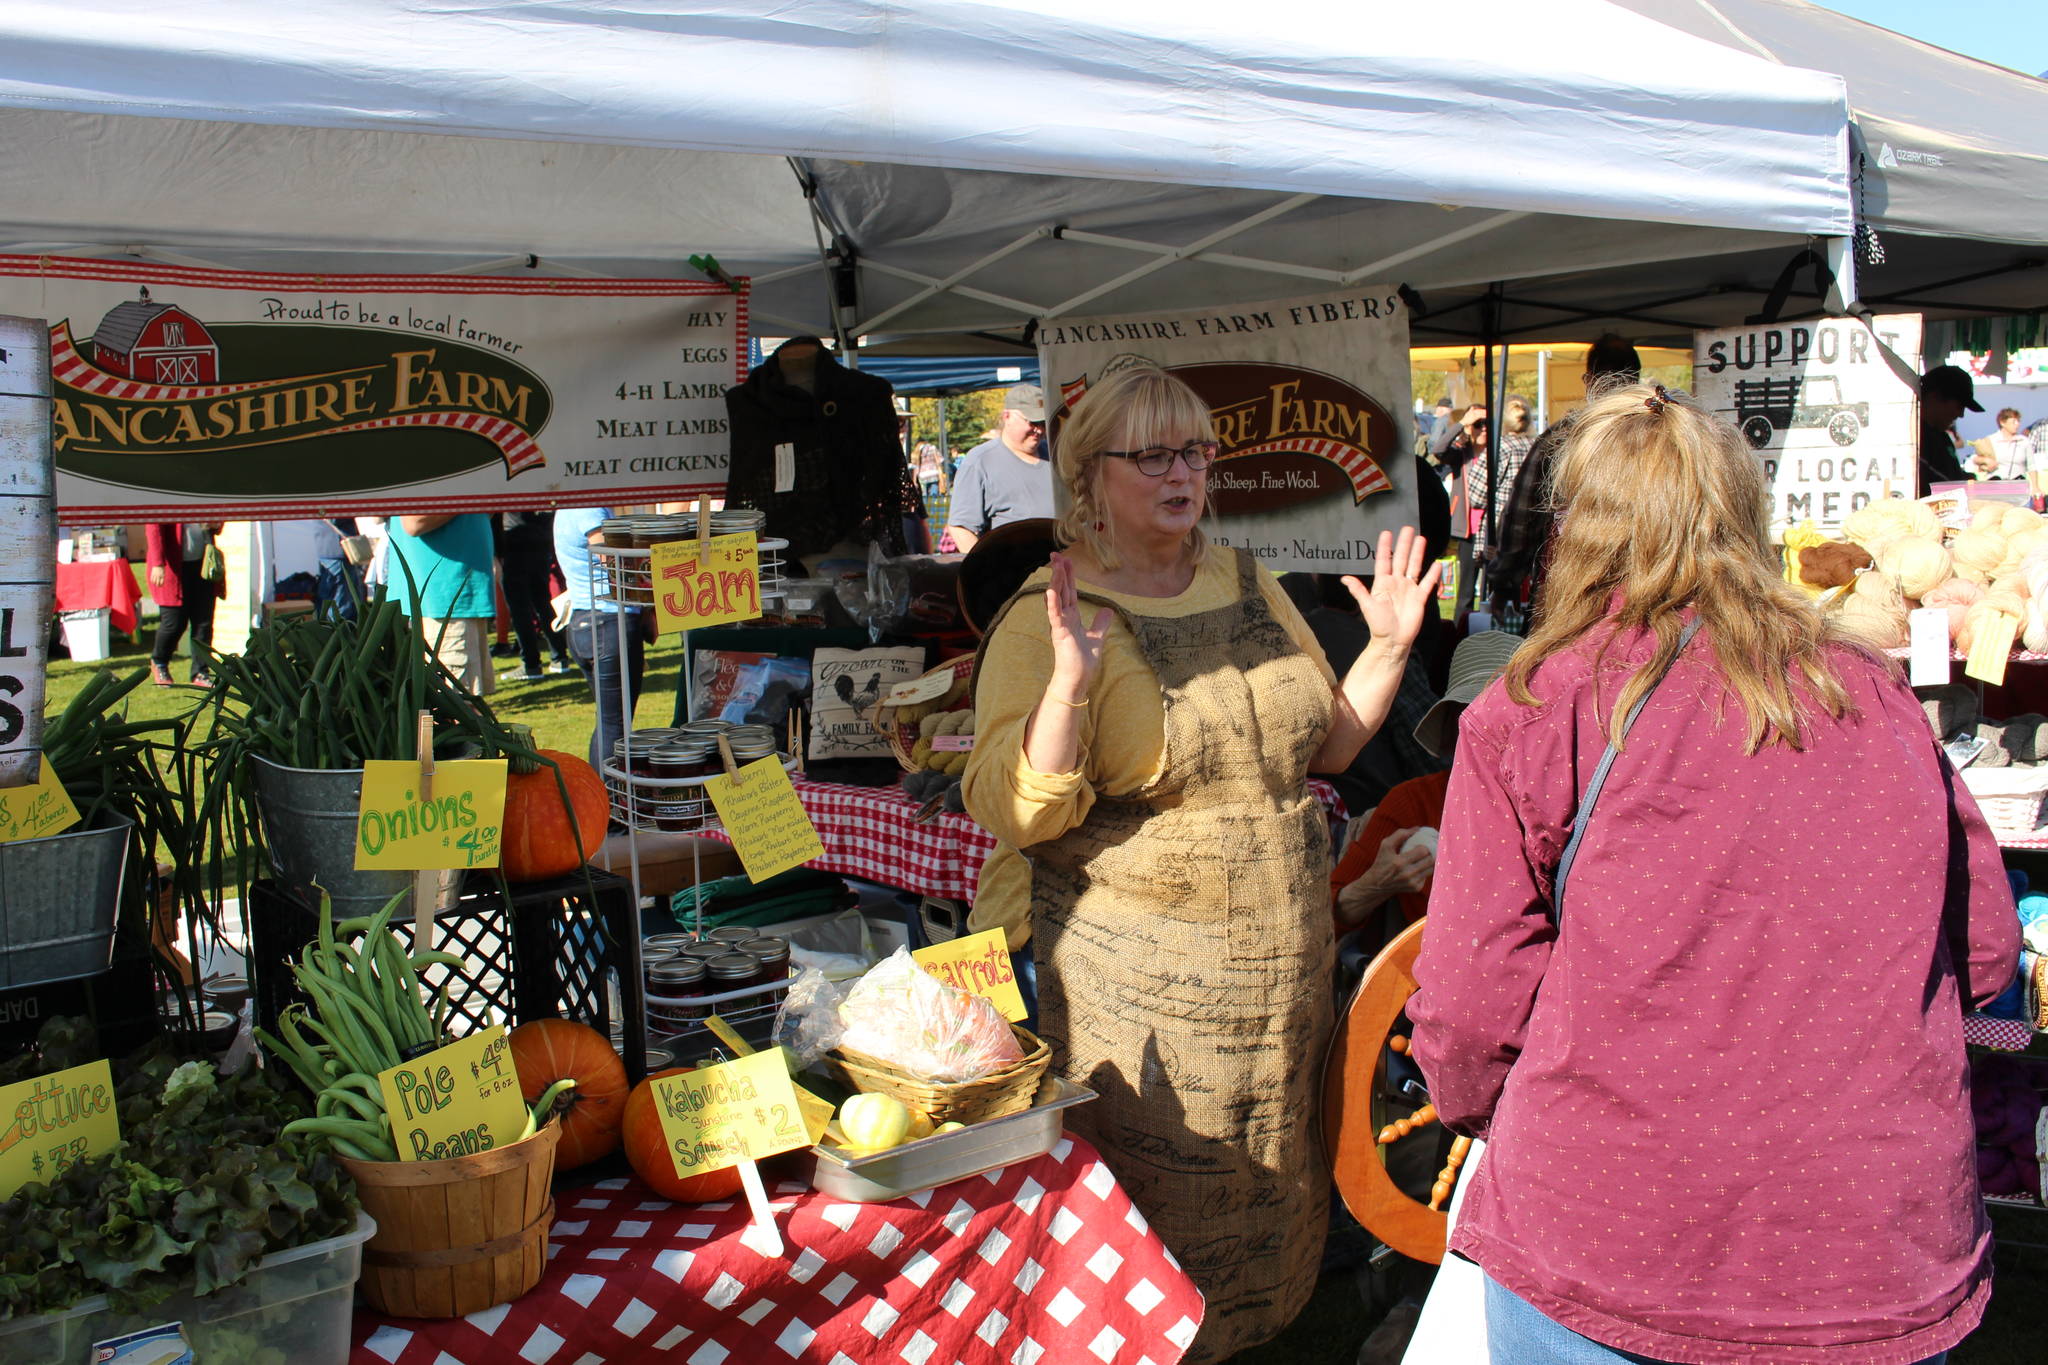 Jane Conway of Lancashire Farm shows off her products at the Harvest Moon Local Food Festival at Soldotna Creek Park on Sept. 14, 2019. (Photo by Brian Mazurek/Peninsula Clarion)